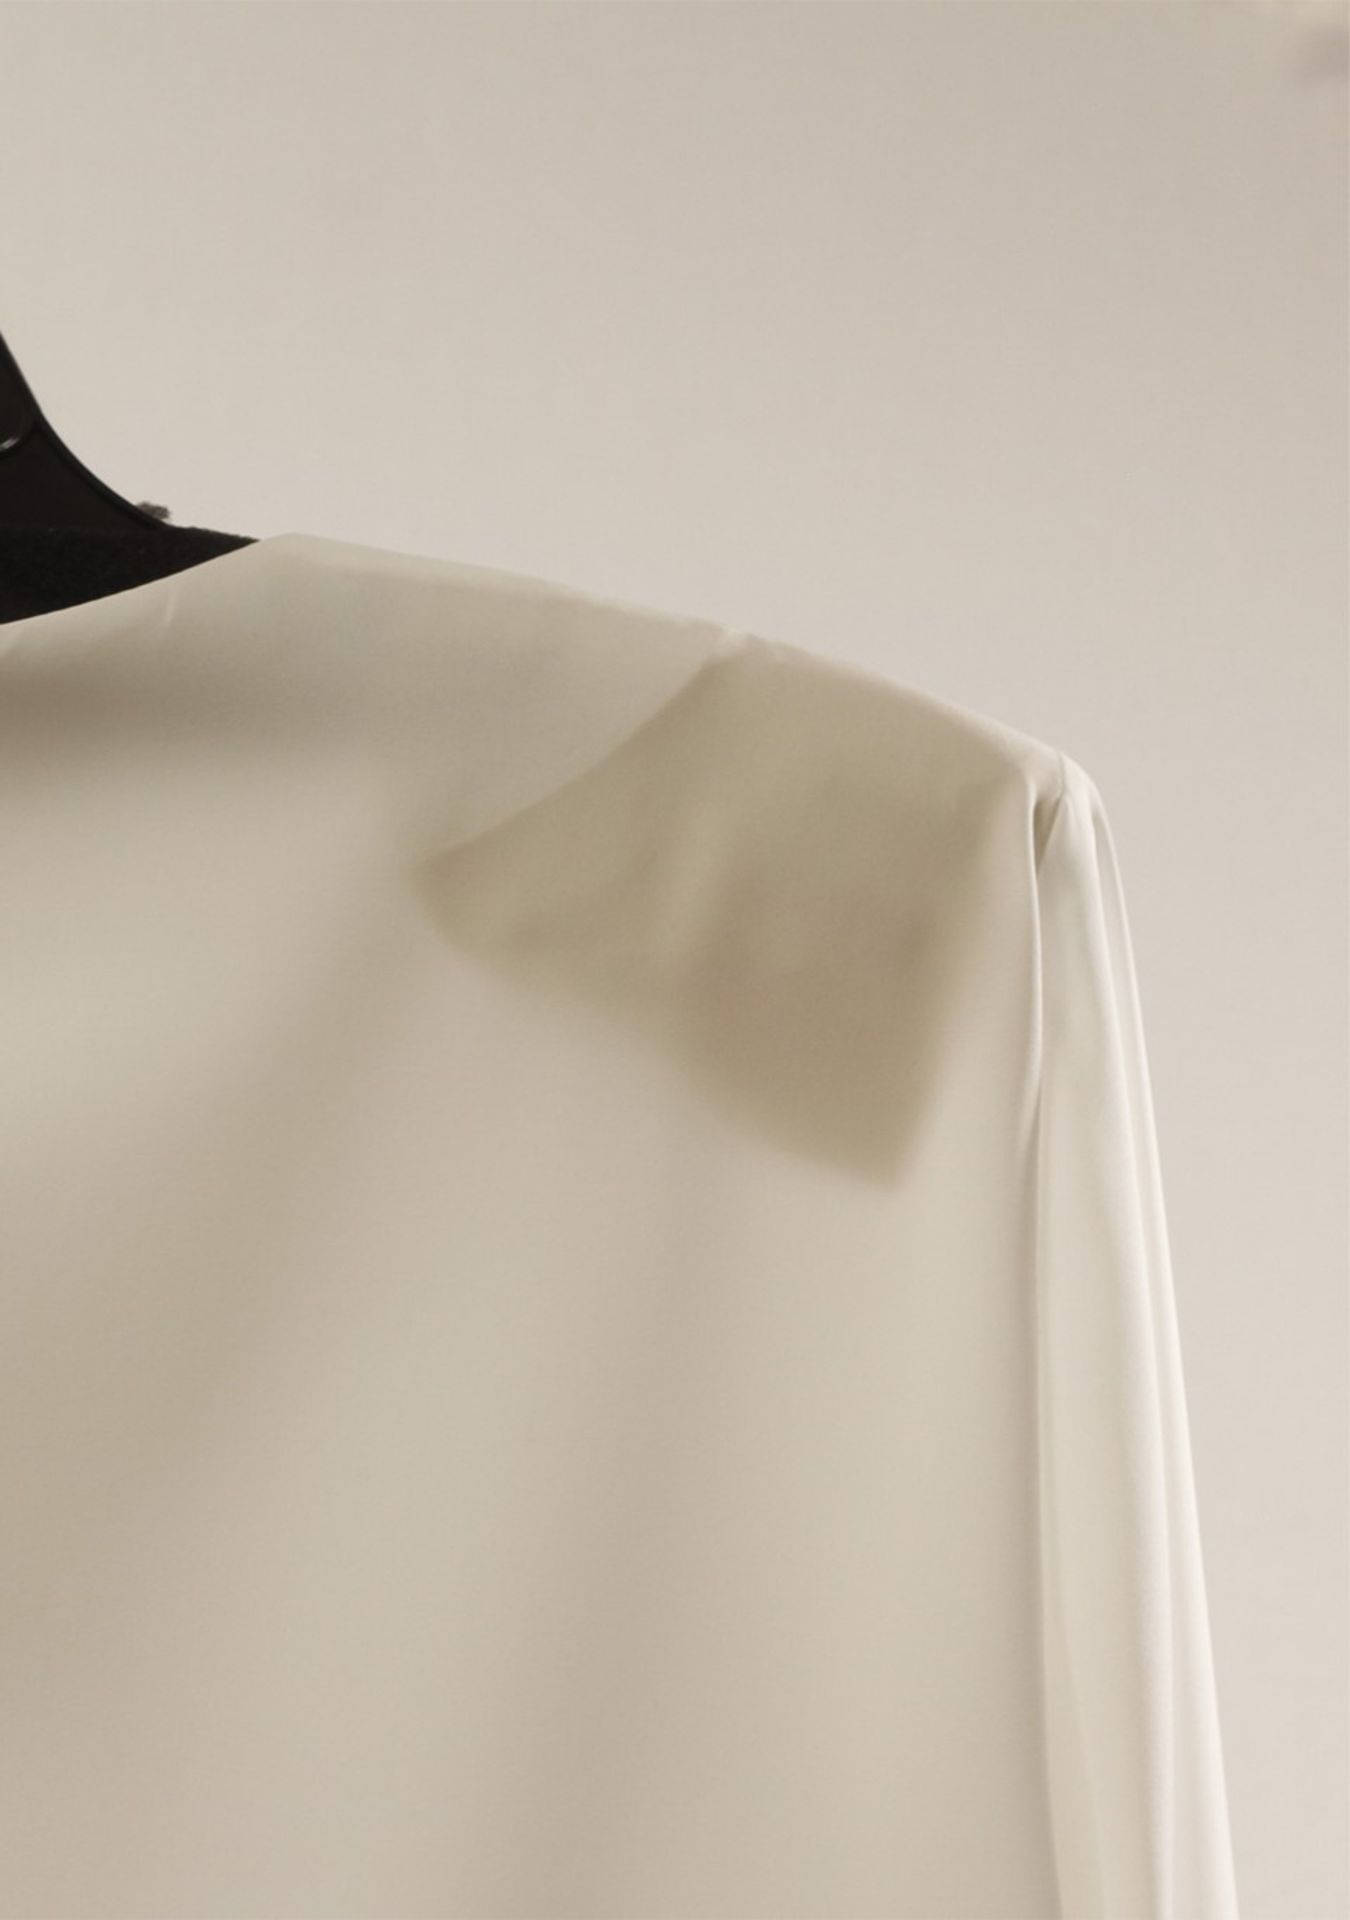 1 x Anne Belin White Shirt - Size: 18 - Material: 100% Polyester - From a High End Clothing Boutique - Image 4 of 9